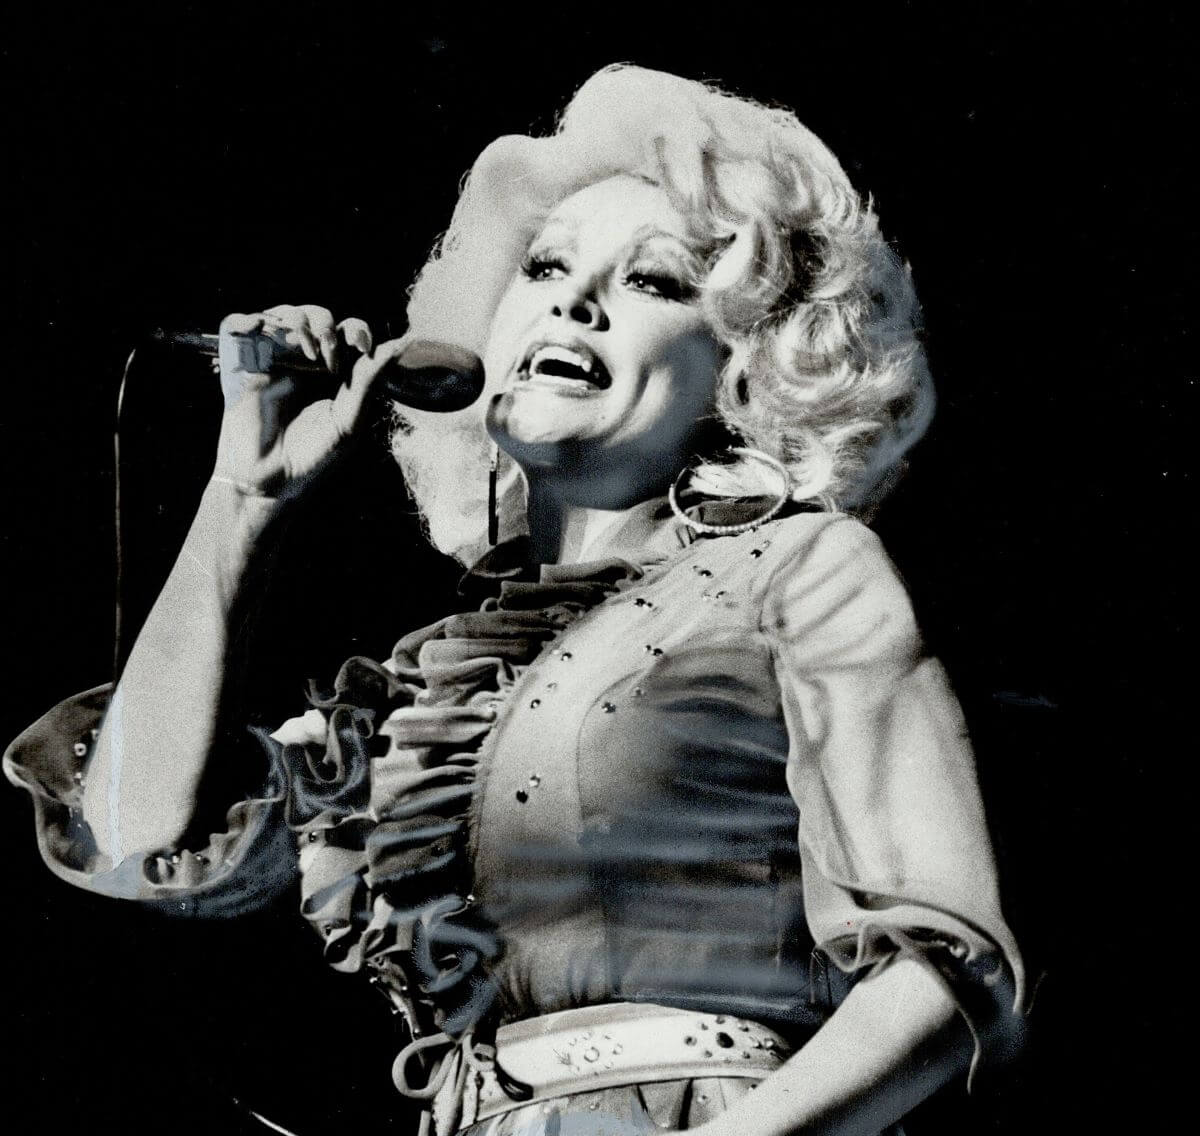 A black and white picture of Dolly Parton singing into a microphone.